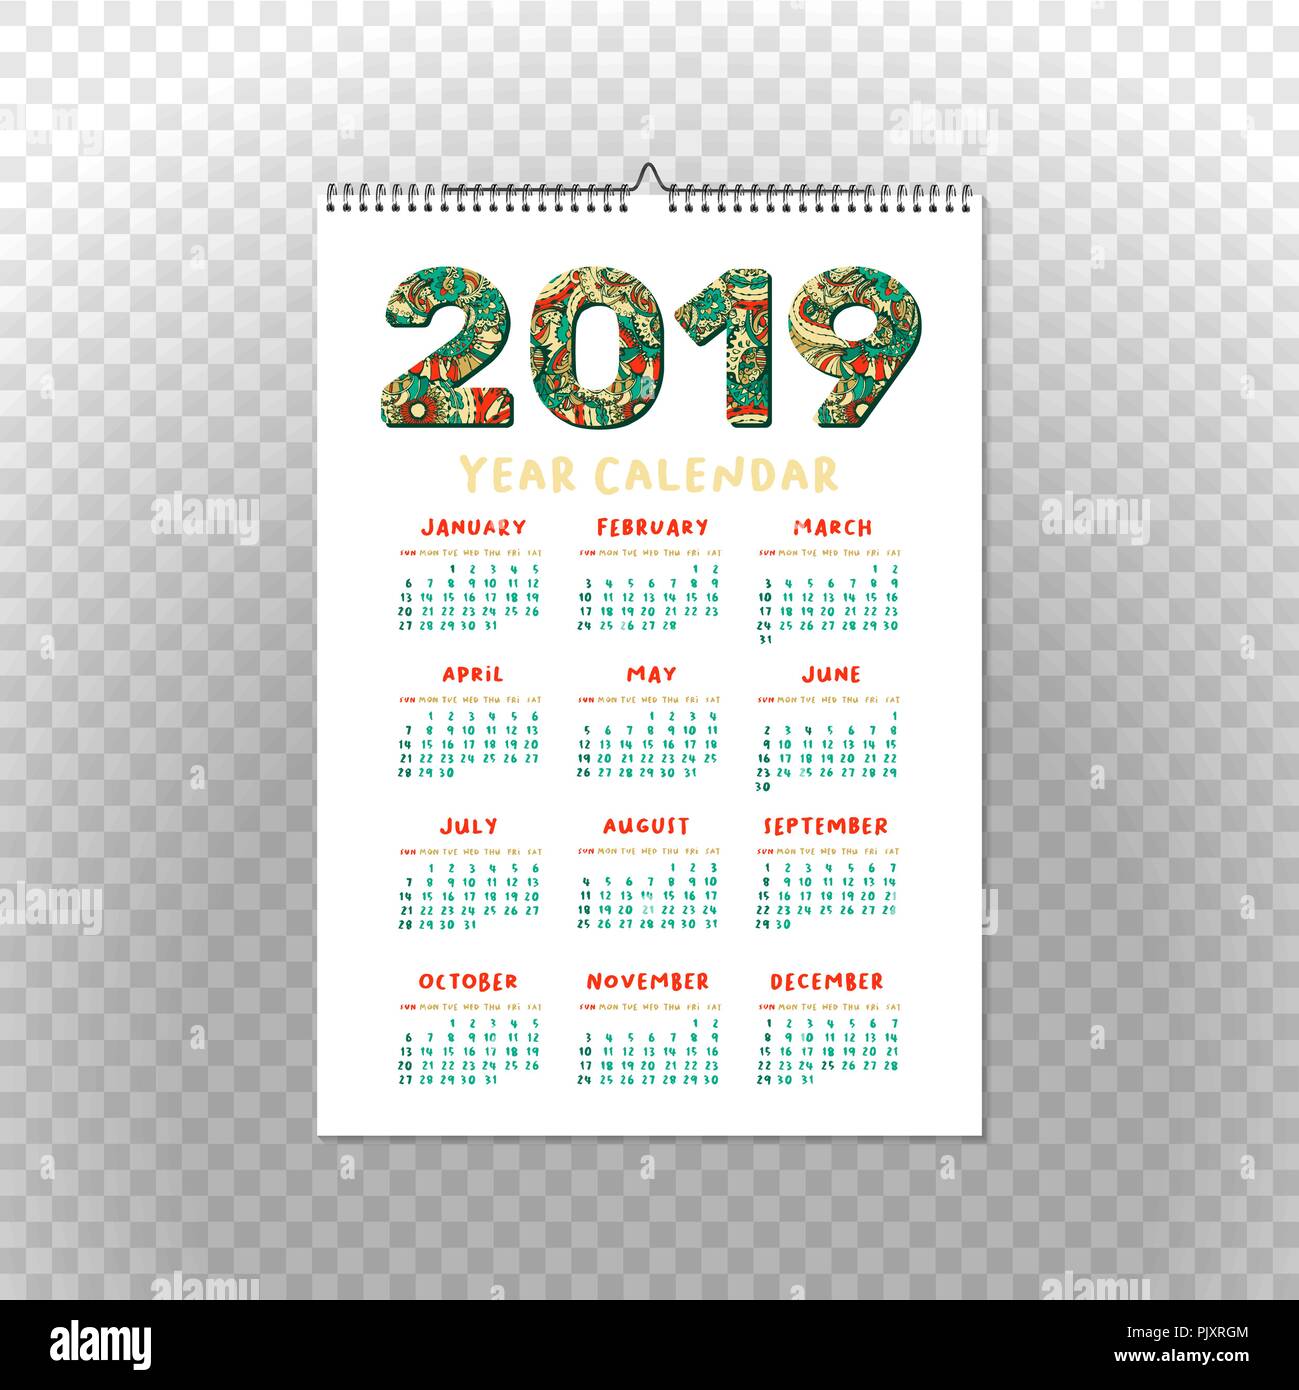 2019 Year Calendar. Xmas or Happy New Year Holiday Design. Isolated Vector Poster. Vertical Template Stock Vector